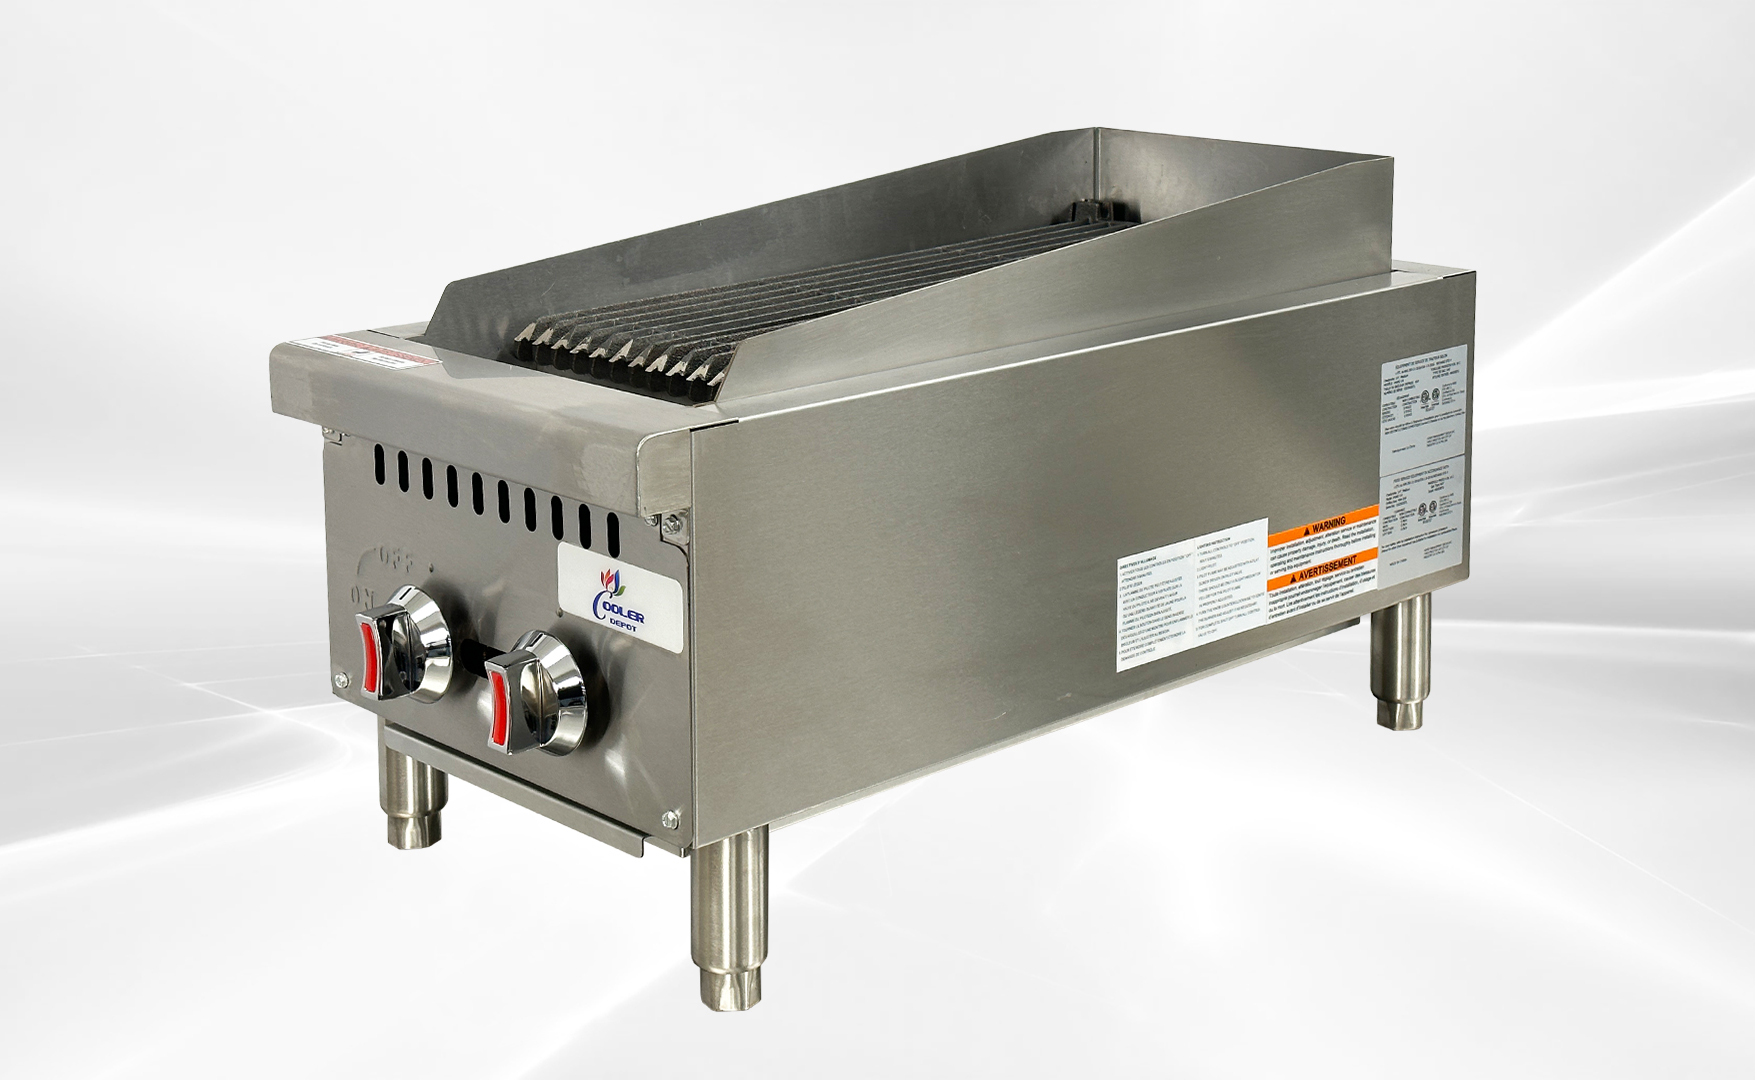 NSF 14 inches Radiant broiler HWRC-14